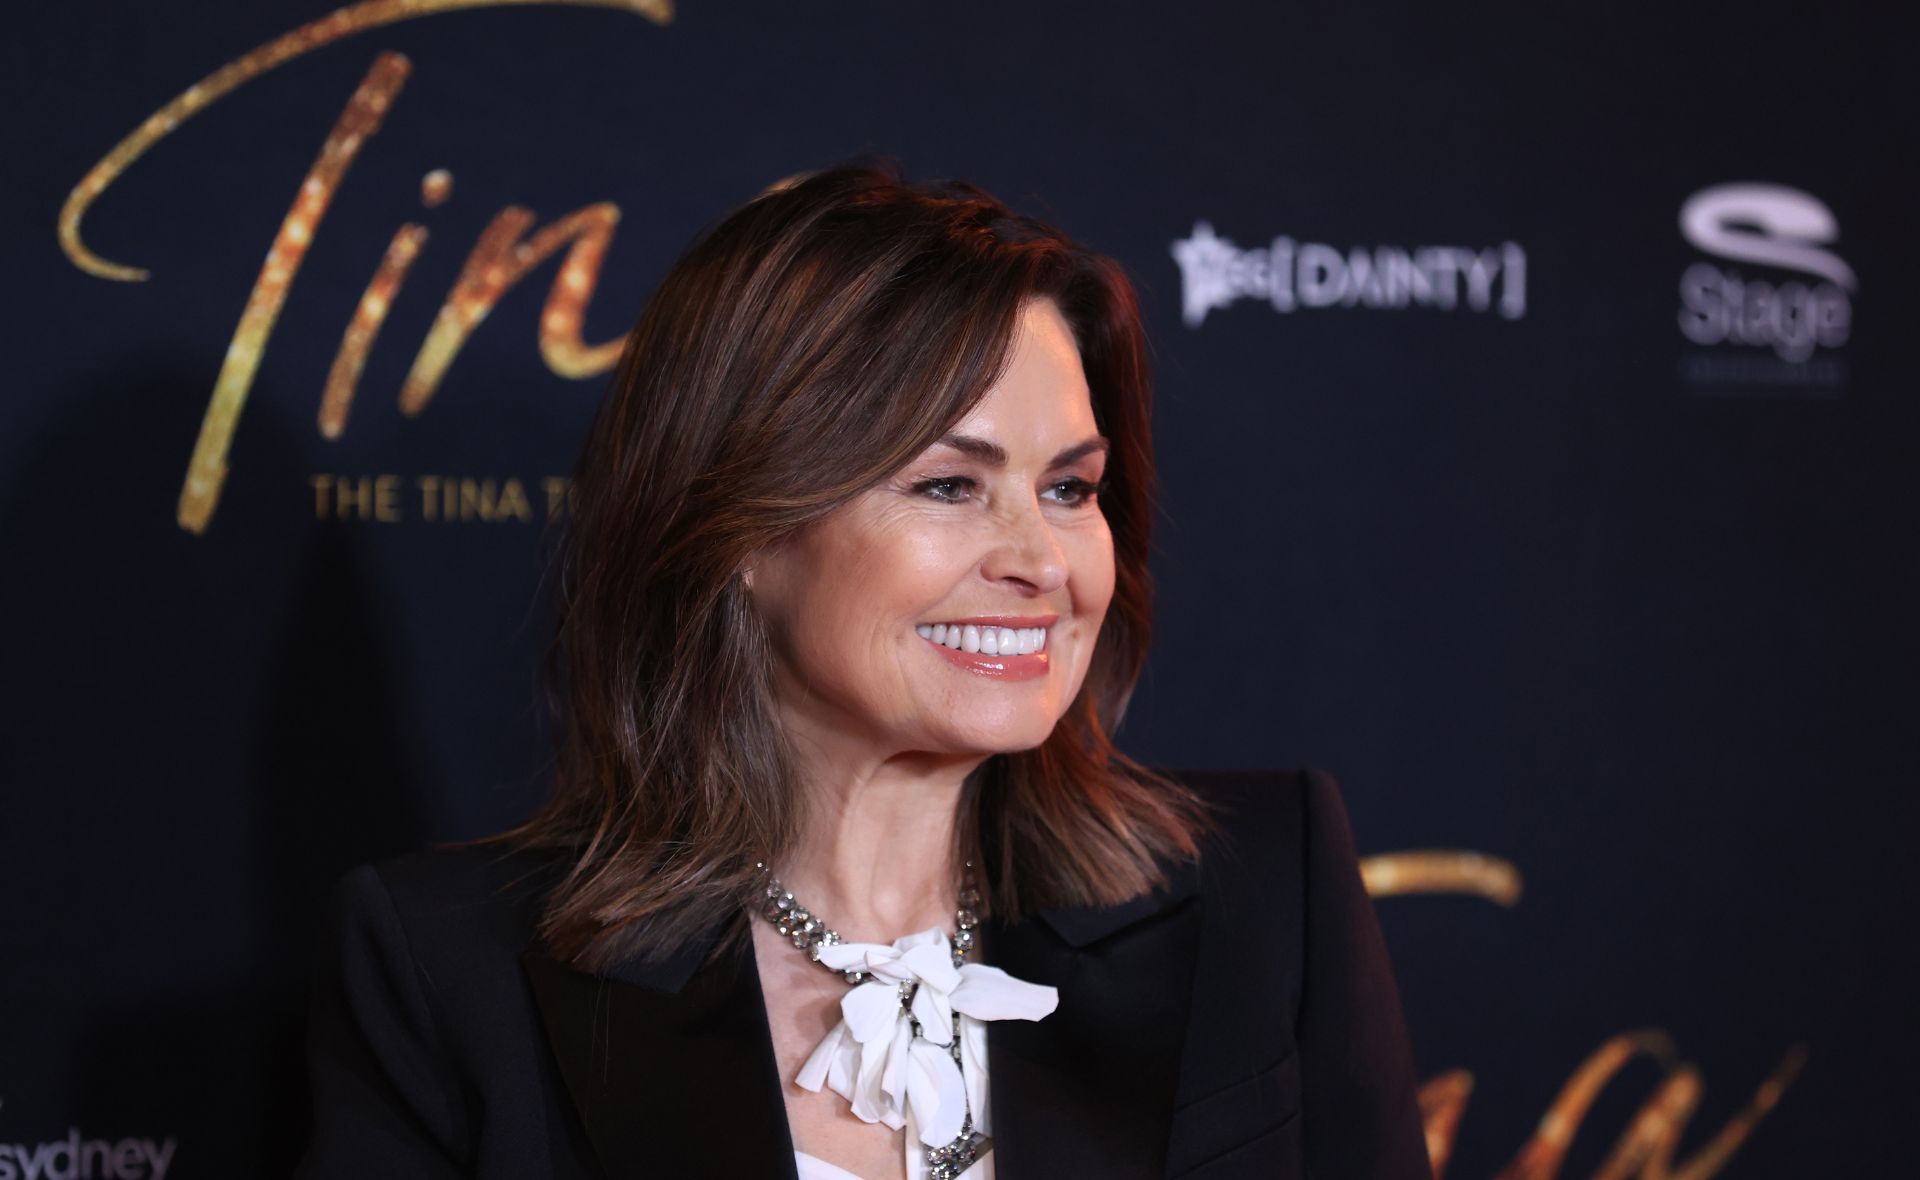 What is Lisa Wilkinson up to now?